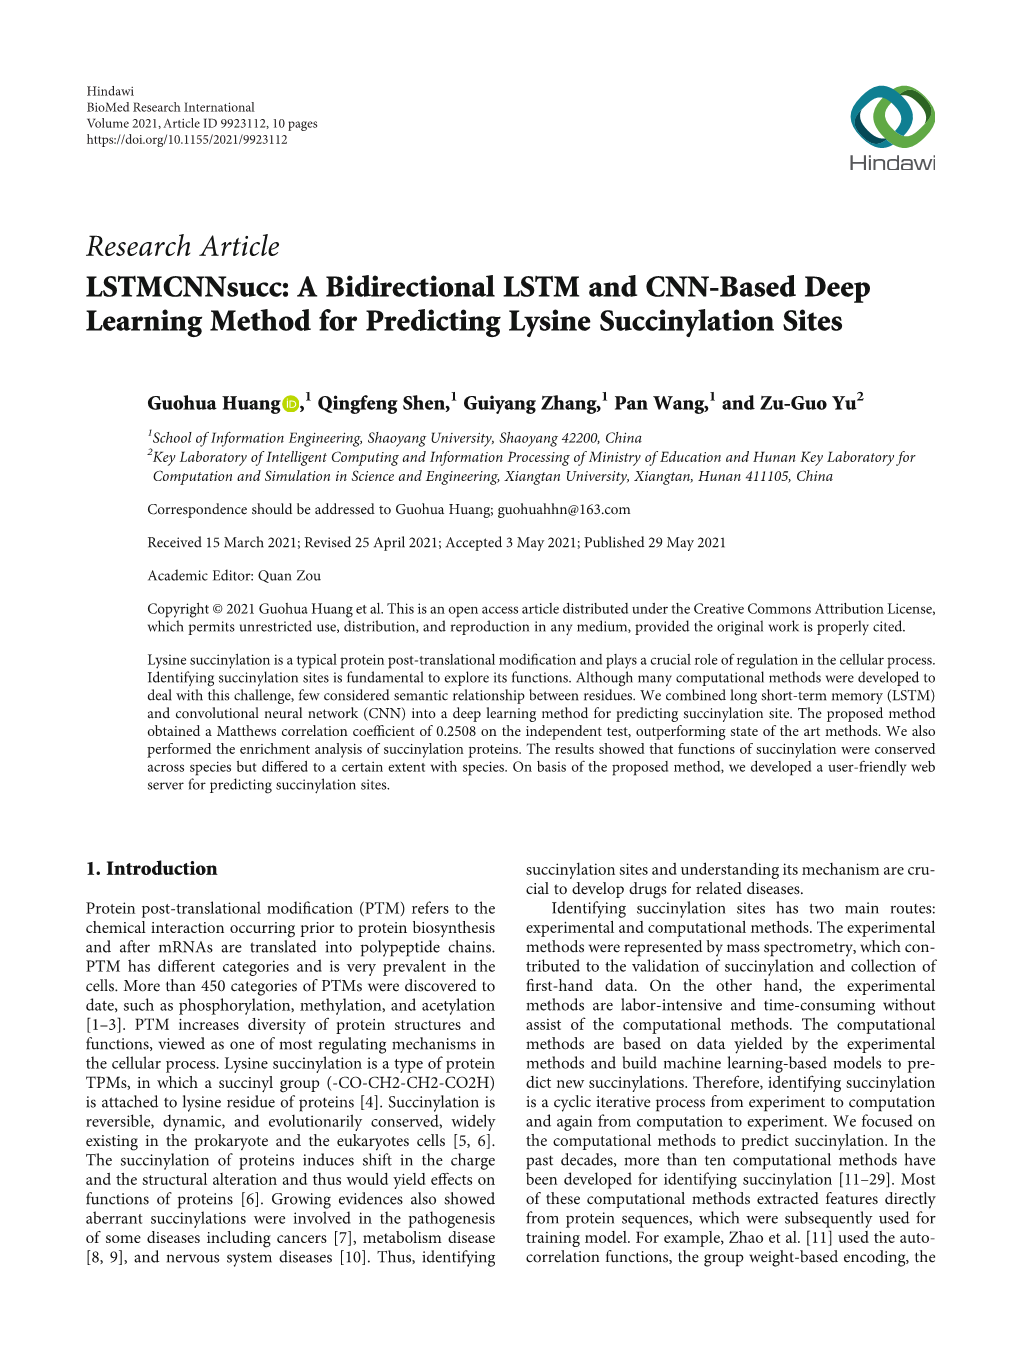 Lstmcnnsucc: a Bidirectional LSTM and CNN-Based Deep Learning Method for Predicting Lysine Succinylation Sites